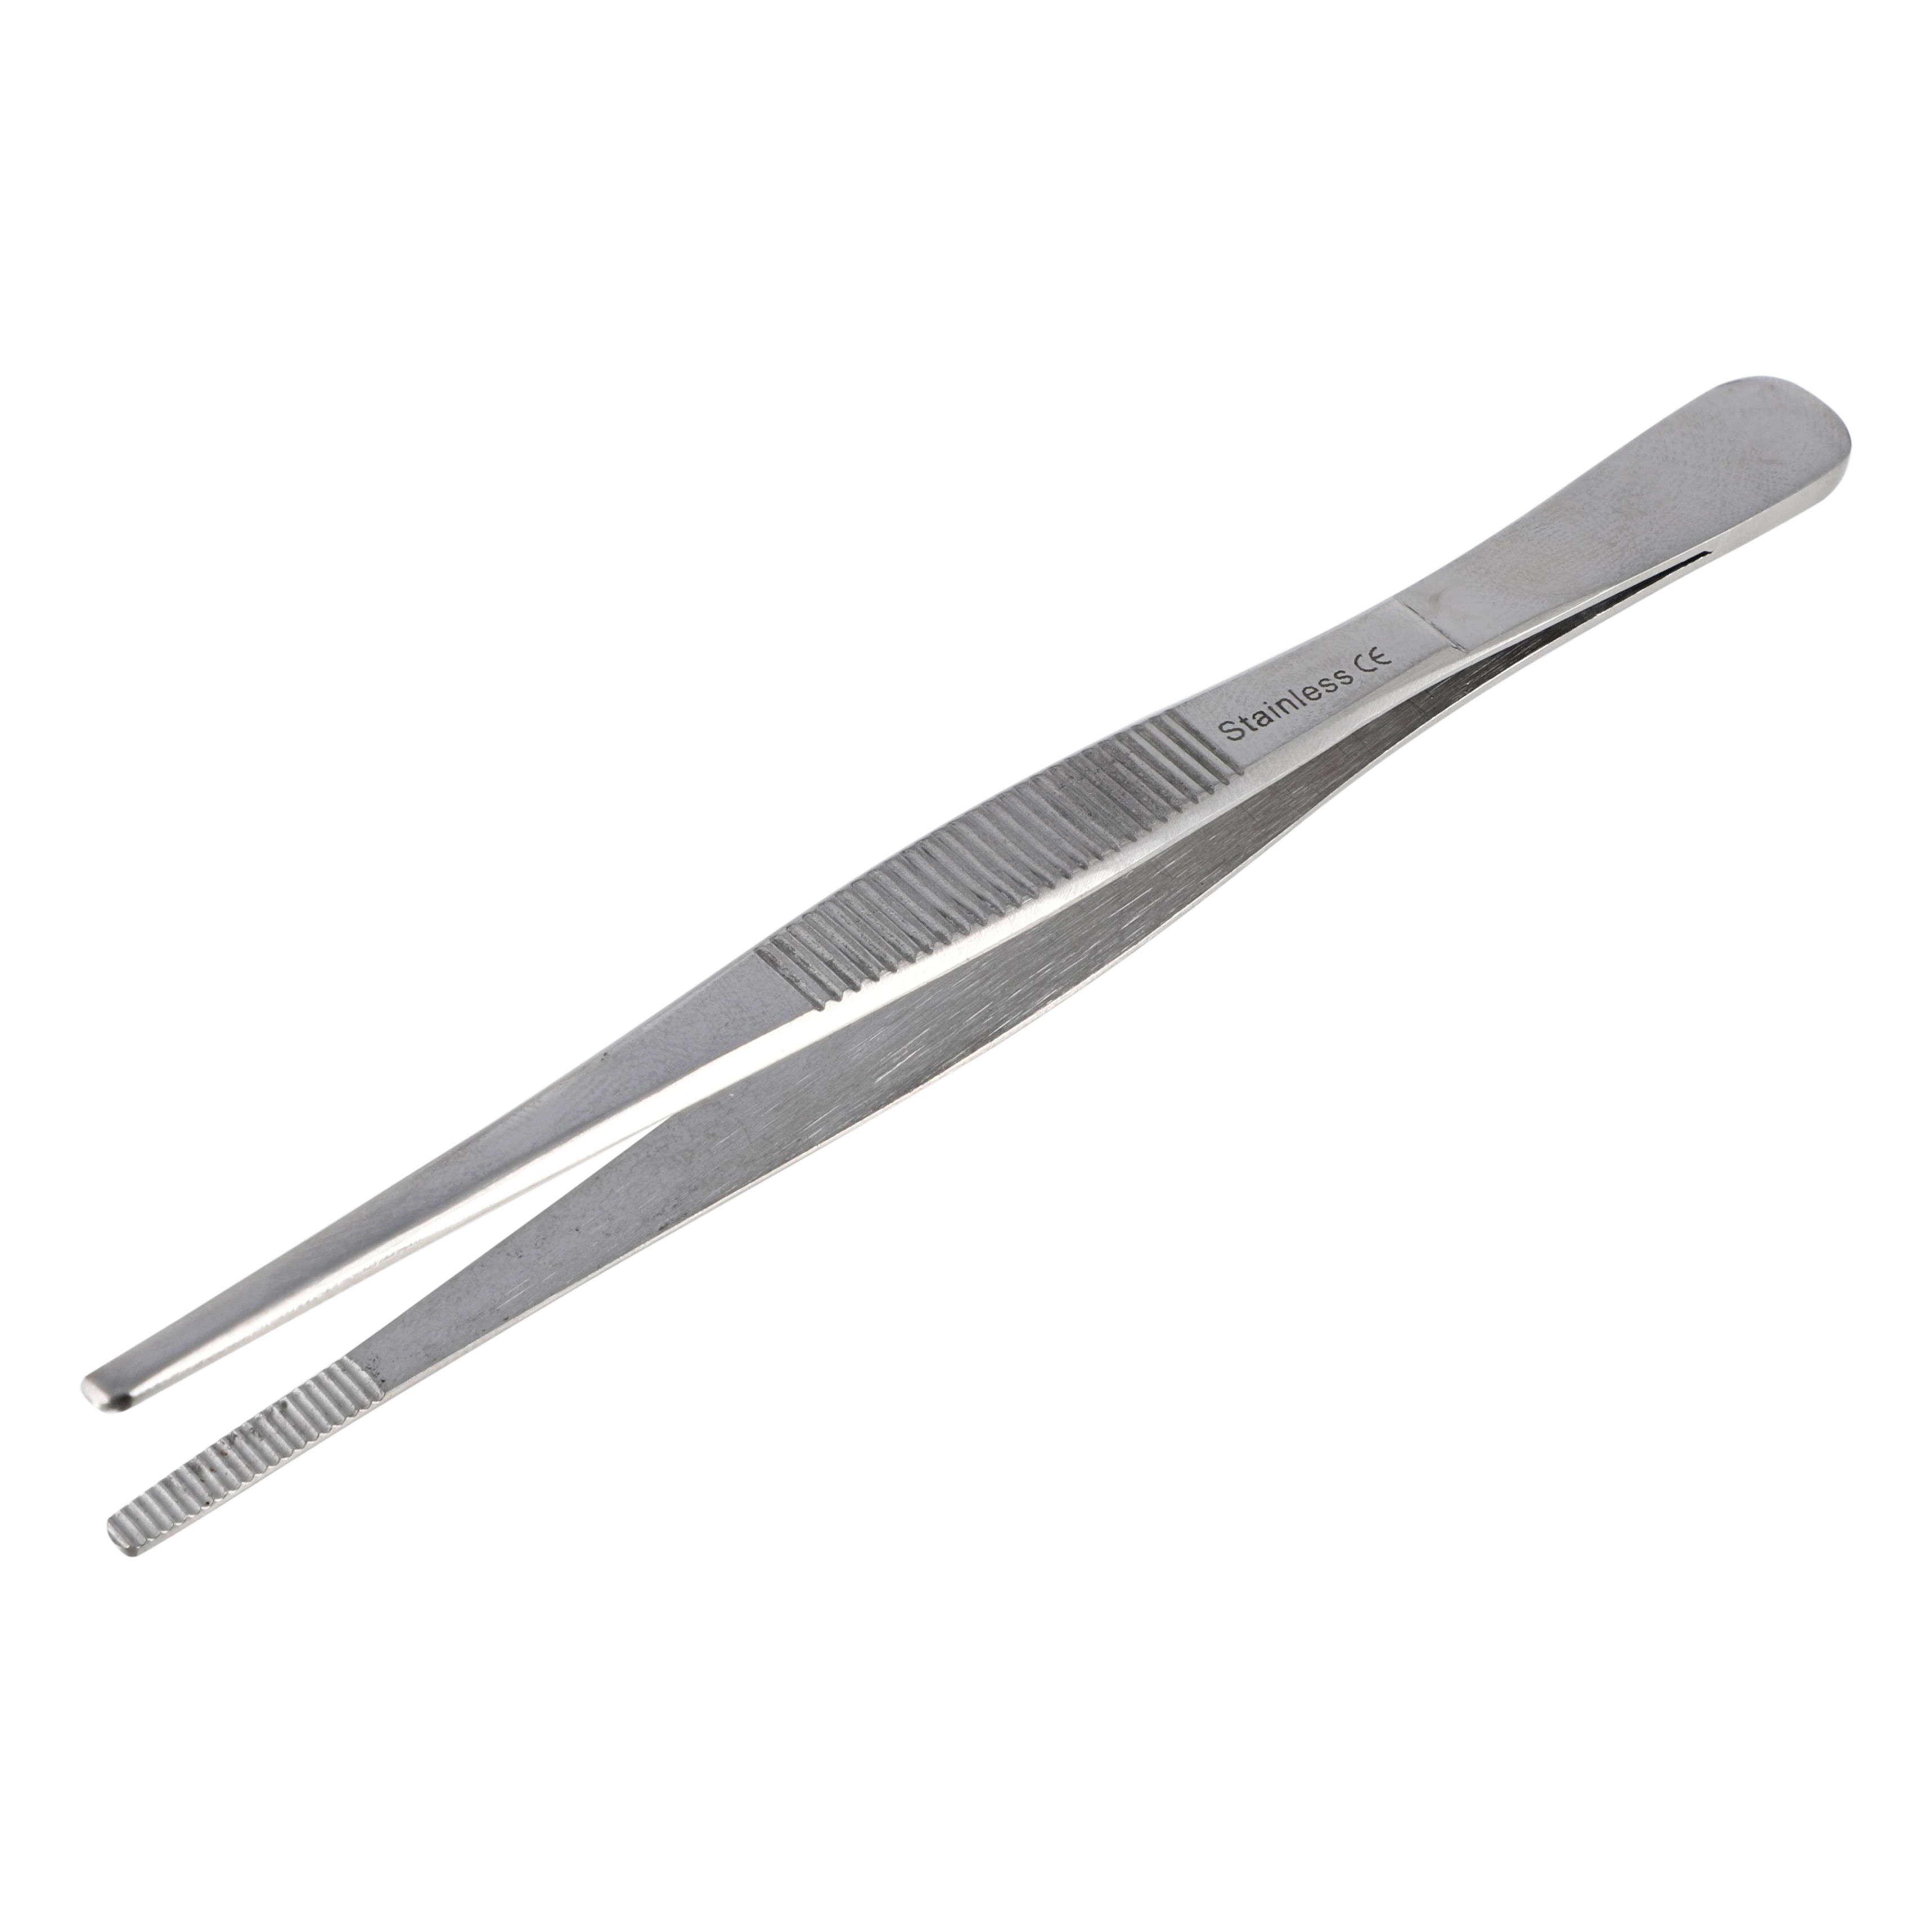 Forceps Blunt Ends Stainless Steel 130mm